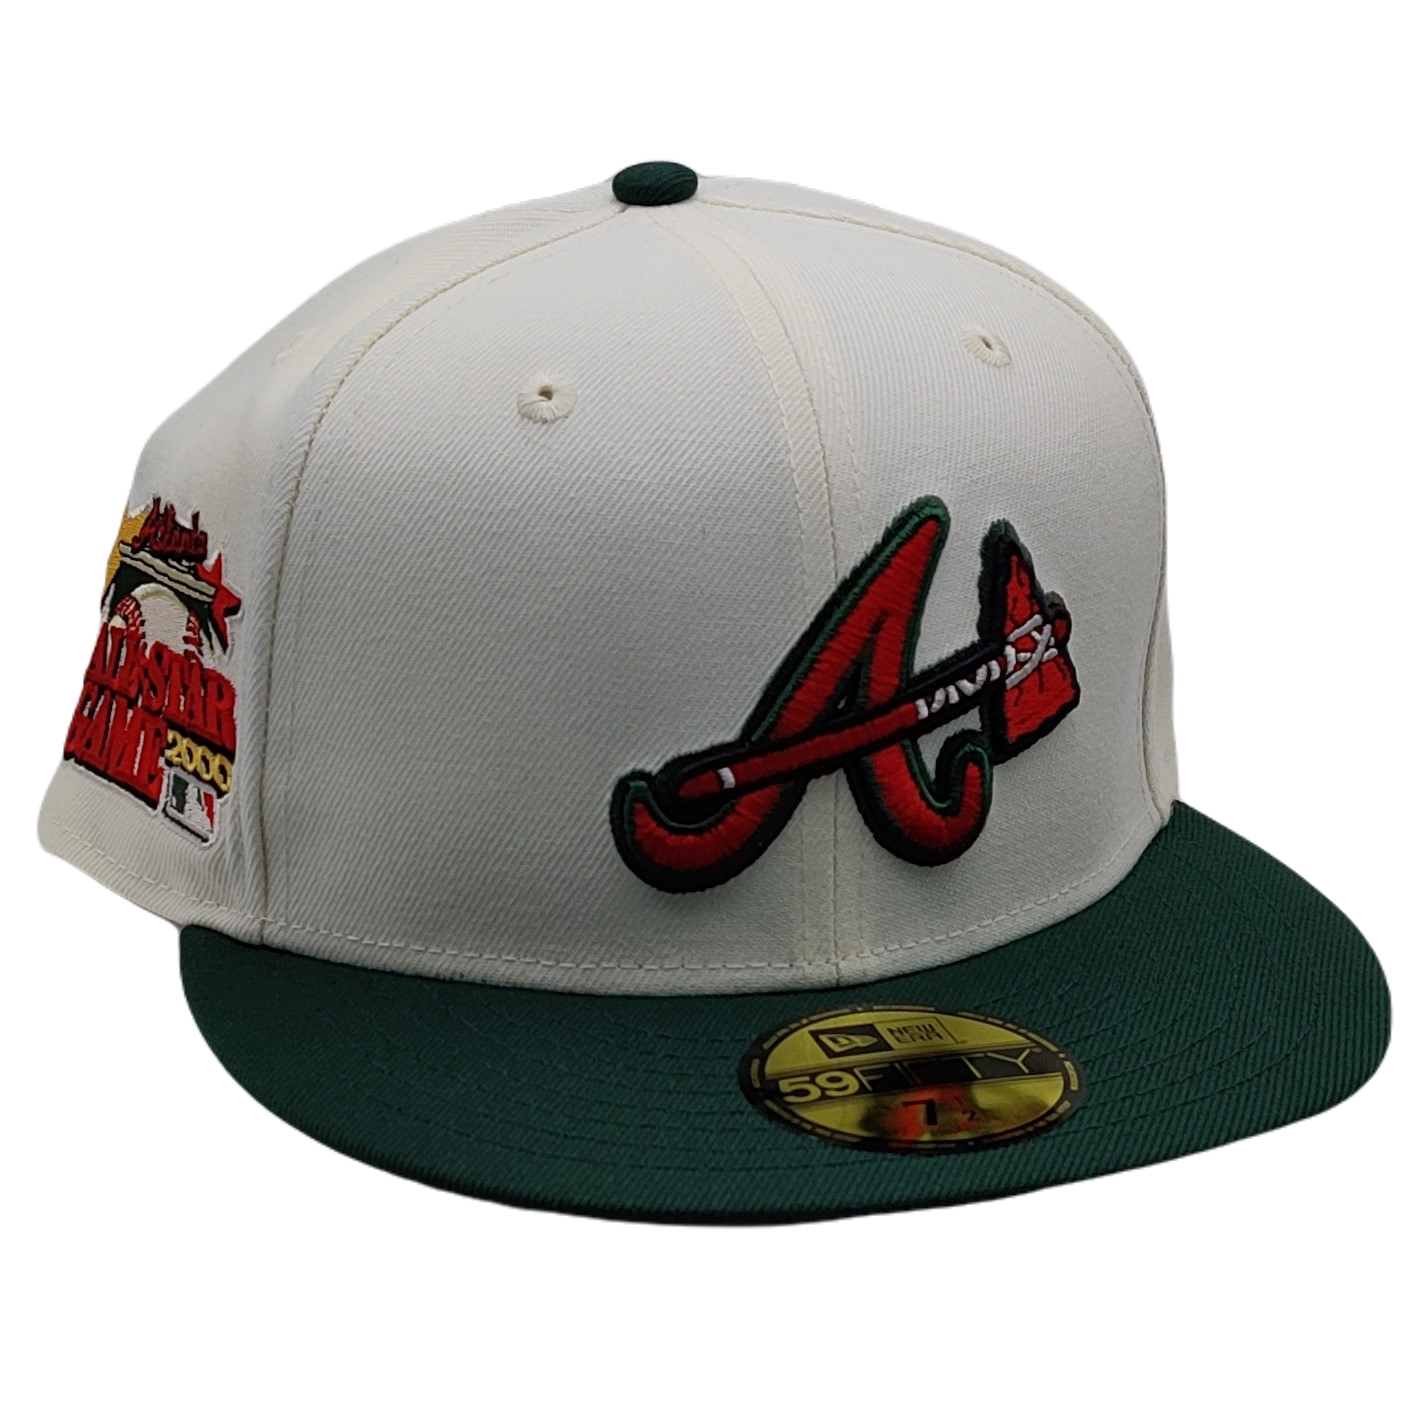 Offset x Atlanta Braves 59Fifty Fitted Cap Collection by Offset x